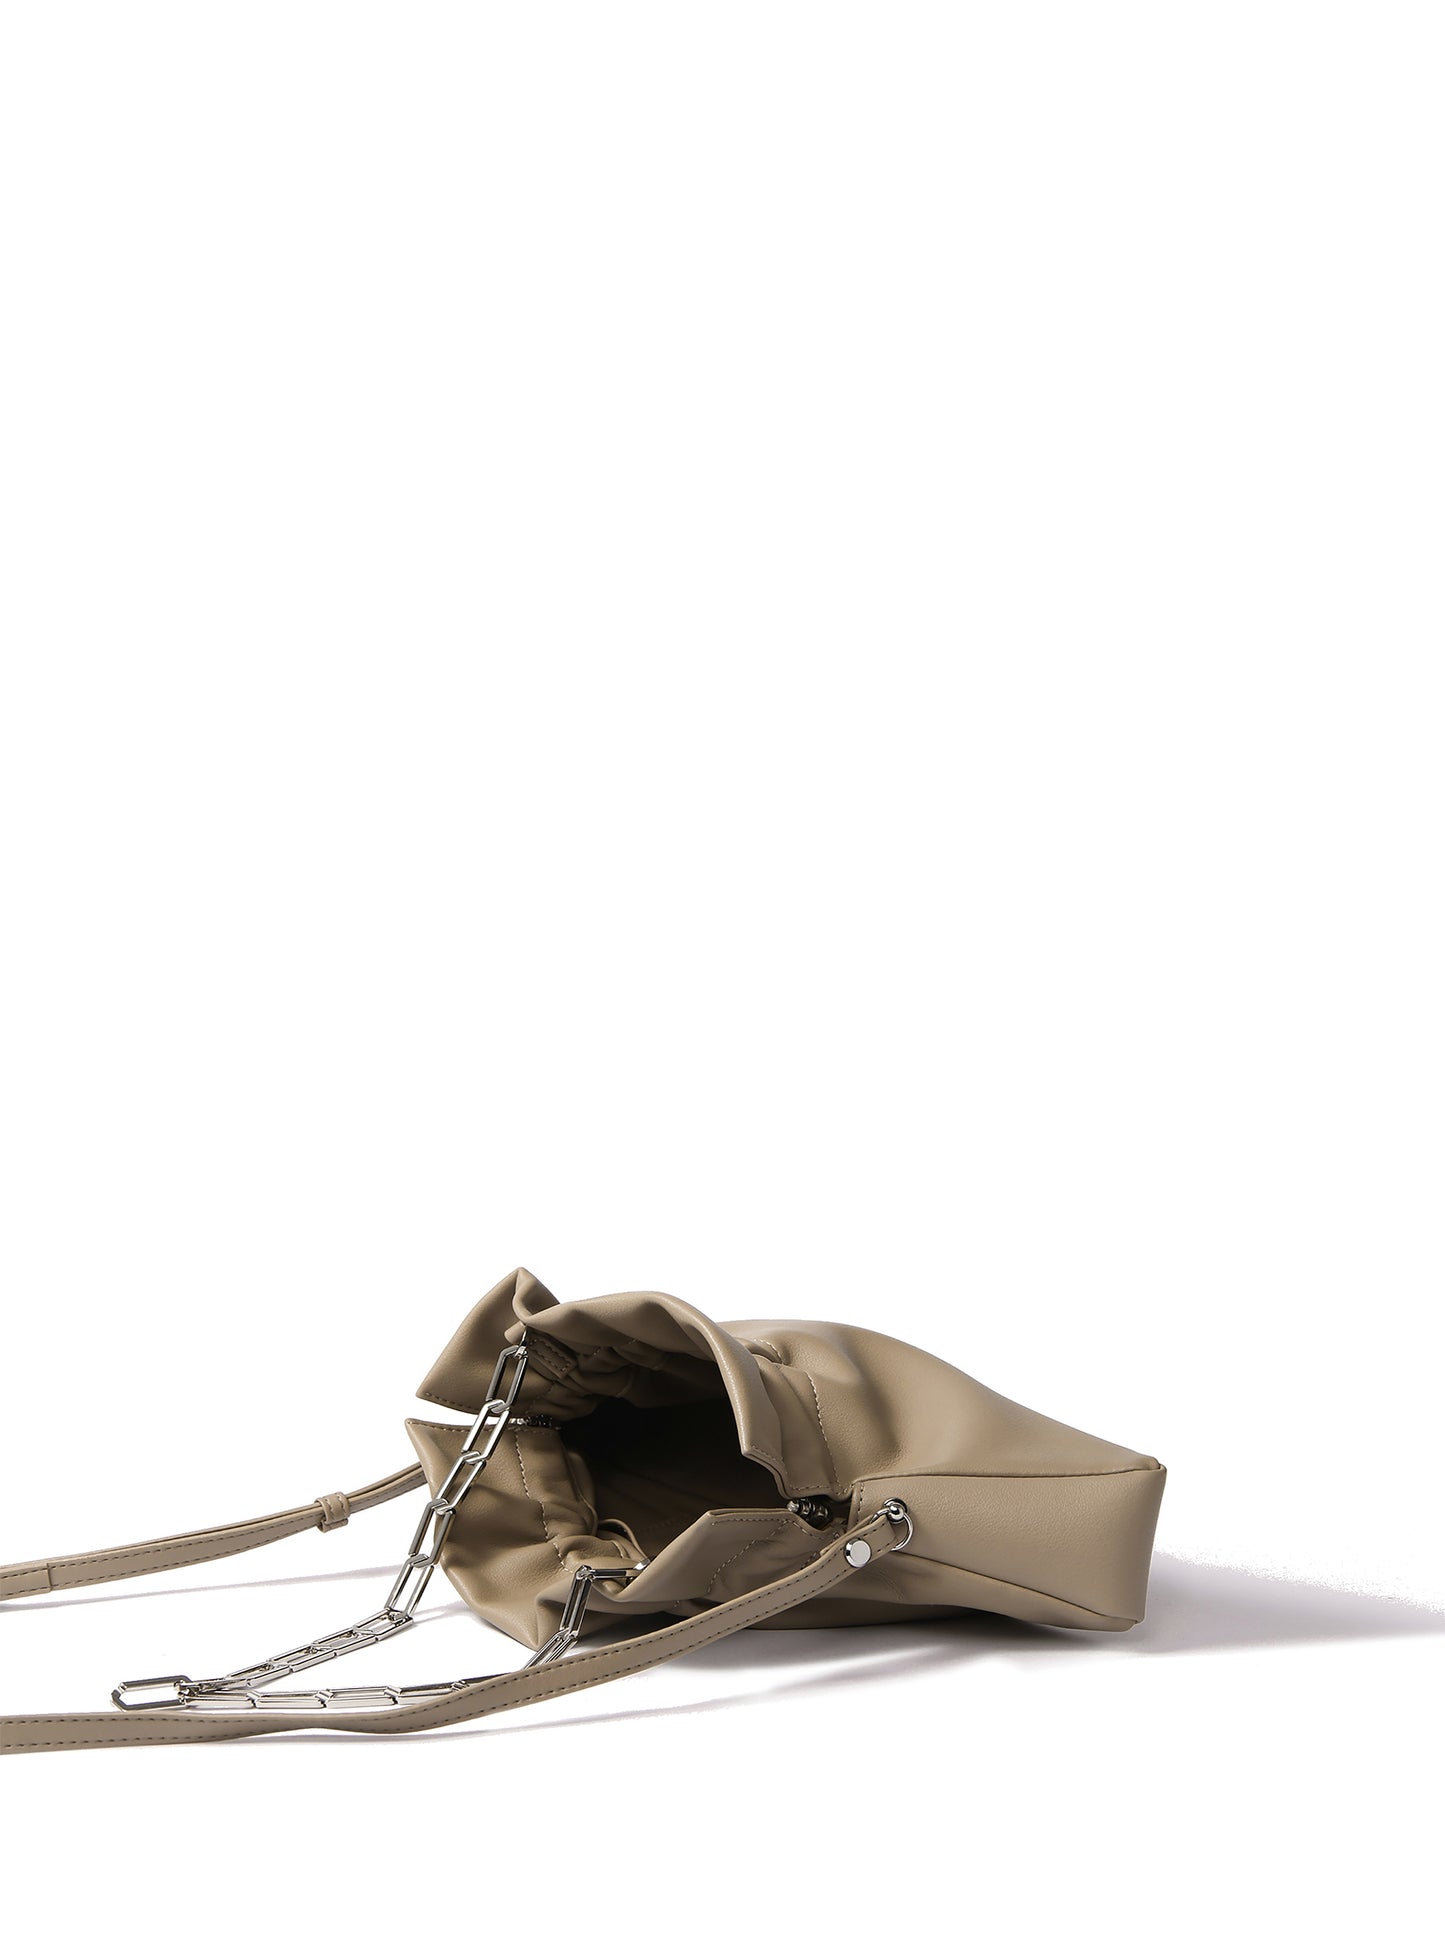 Mila Bag in Smooth Leather, Coffee